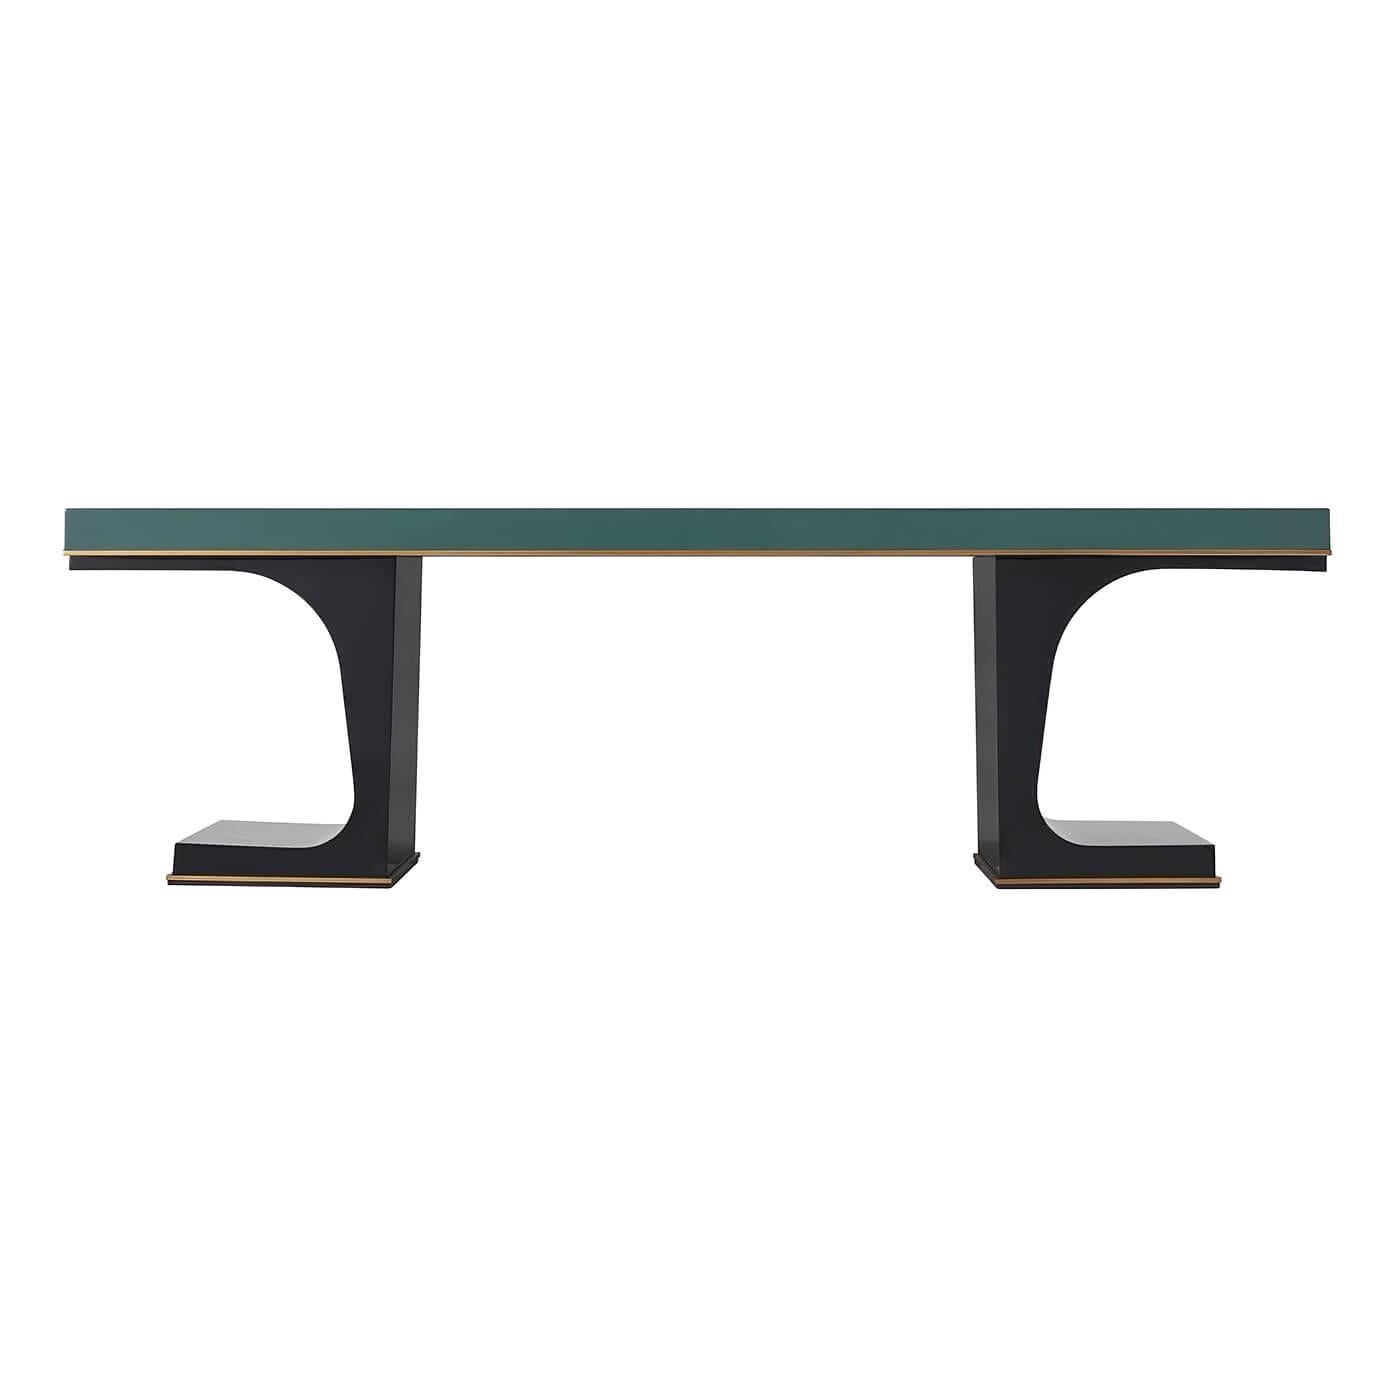 Midcentury style emerald lacquered cocktail table with gilt details, a high gloss black lacquered I-beam support base also with gilt molded details.

Dimensions: 60